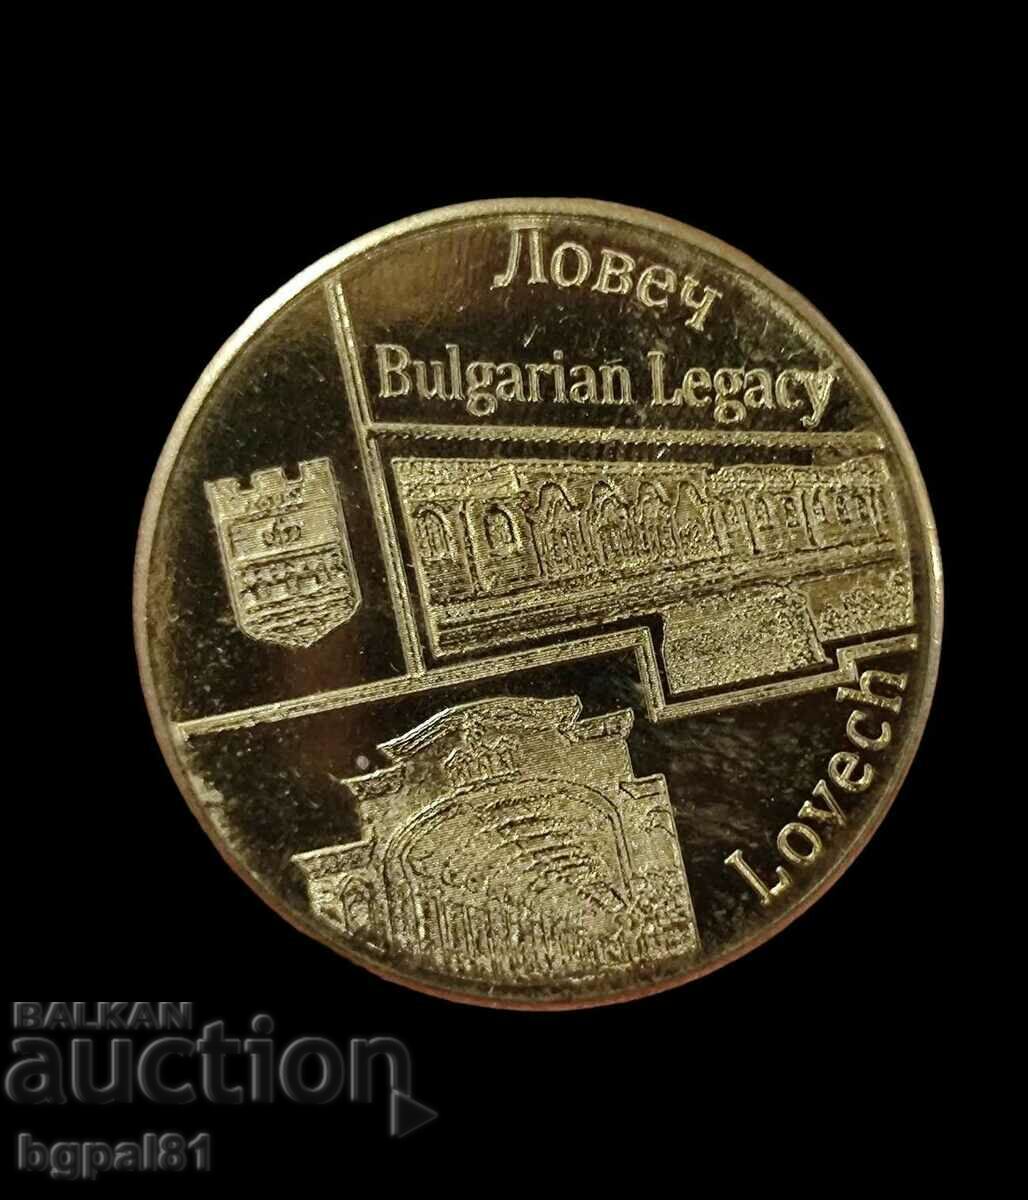 Lovech - "Bulgarian legacy" medal issue